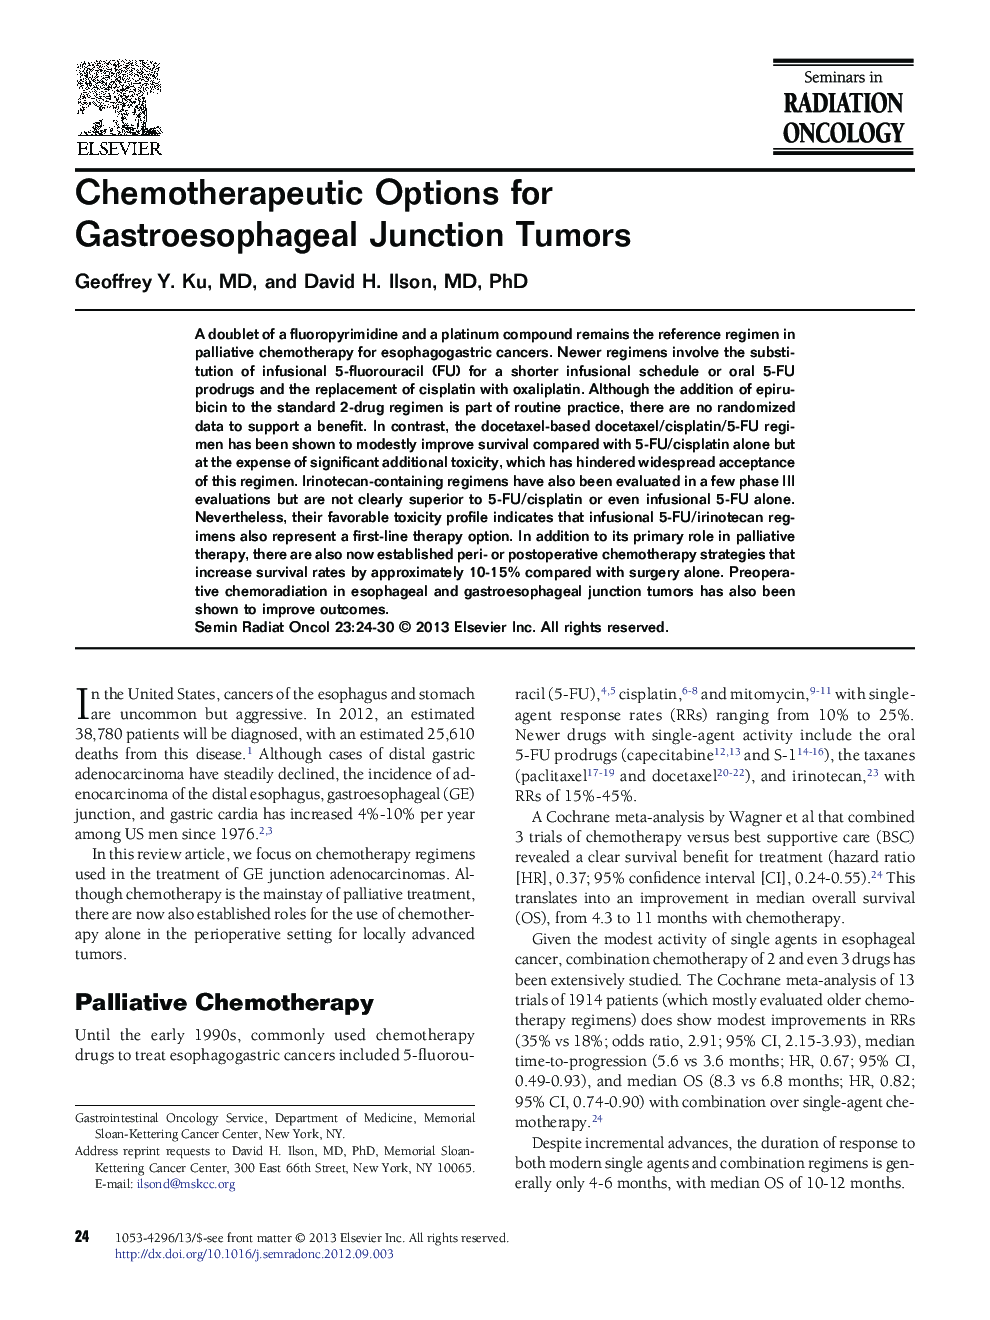 Chemotherapeutic Options for Gastroesophageal Junction Tumors